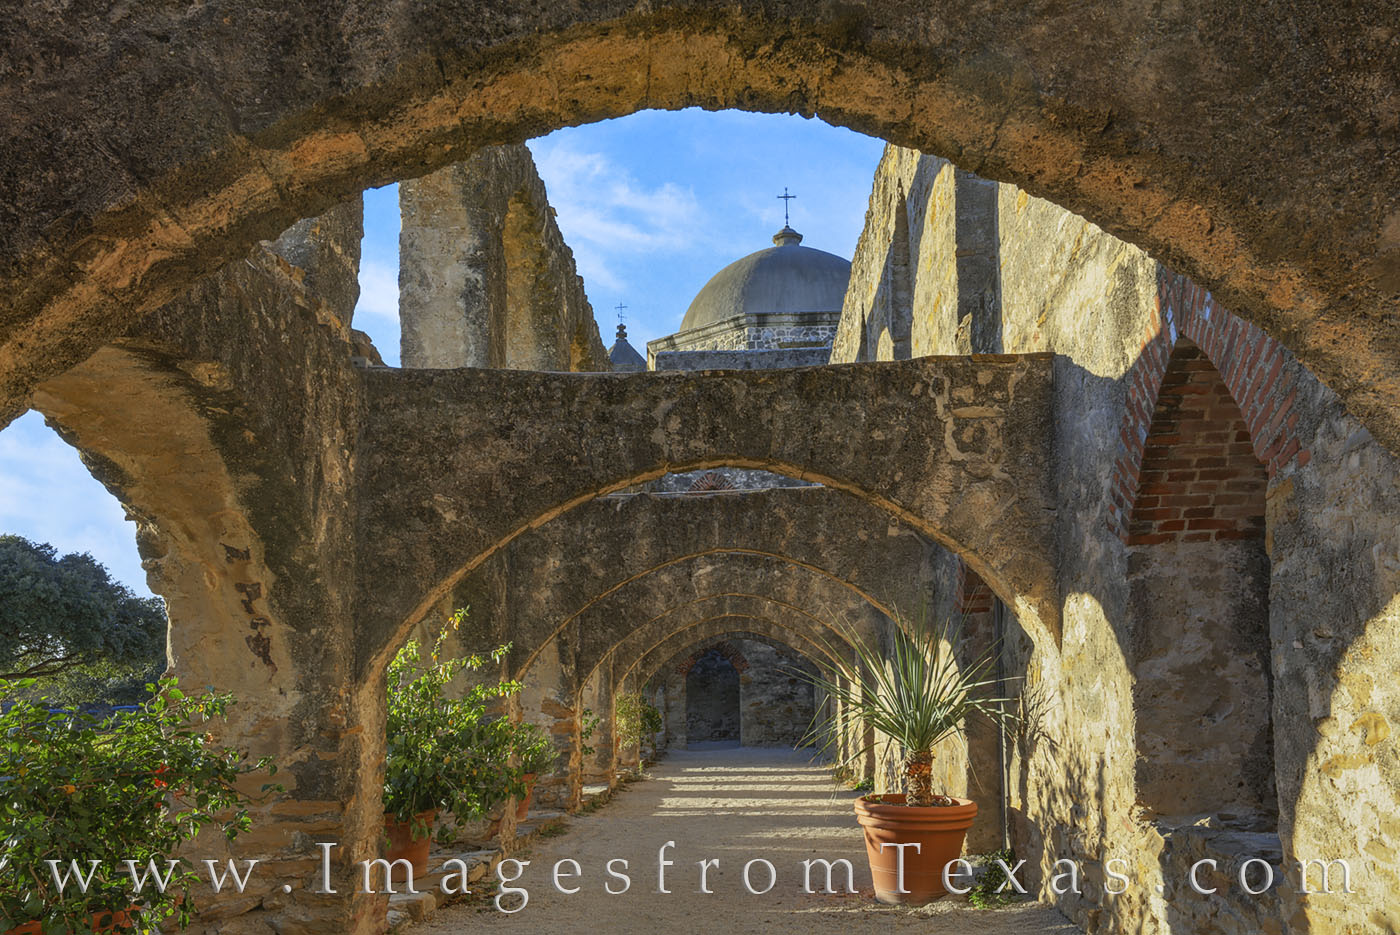 Arches still stand at Mission San Jose, one of five San Antonio missions designated as World Heritage Sites. This historical...